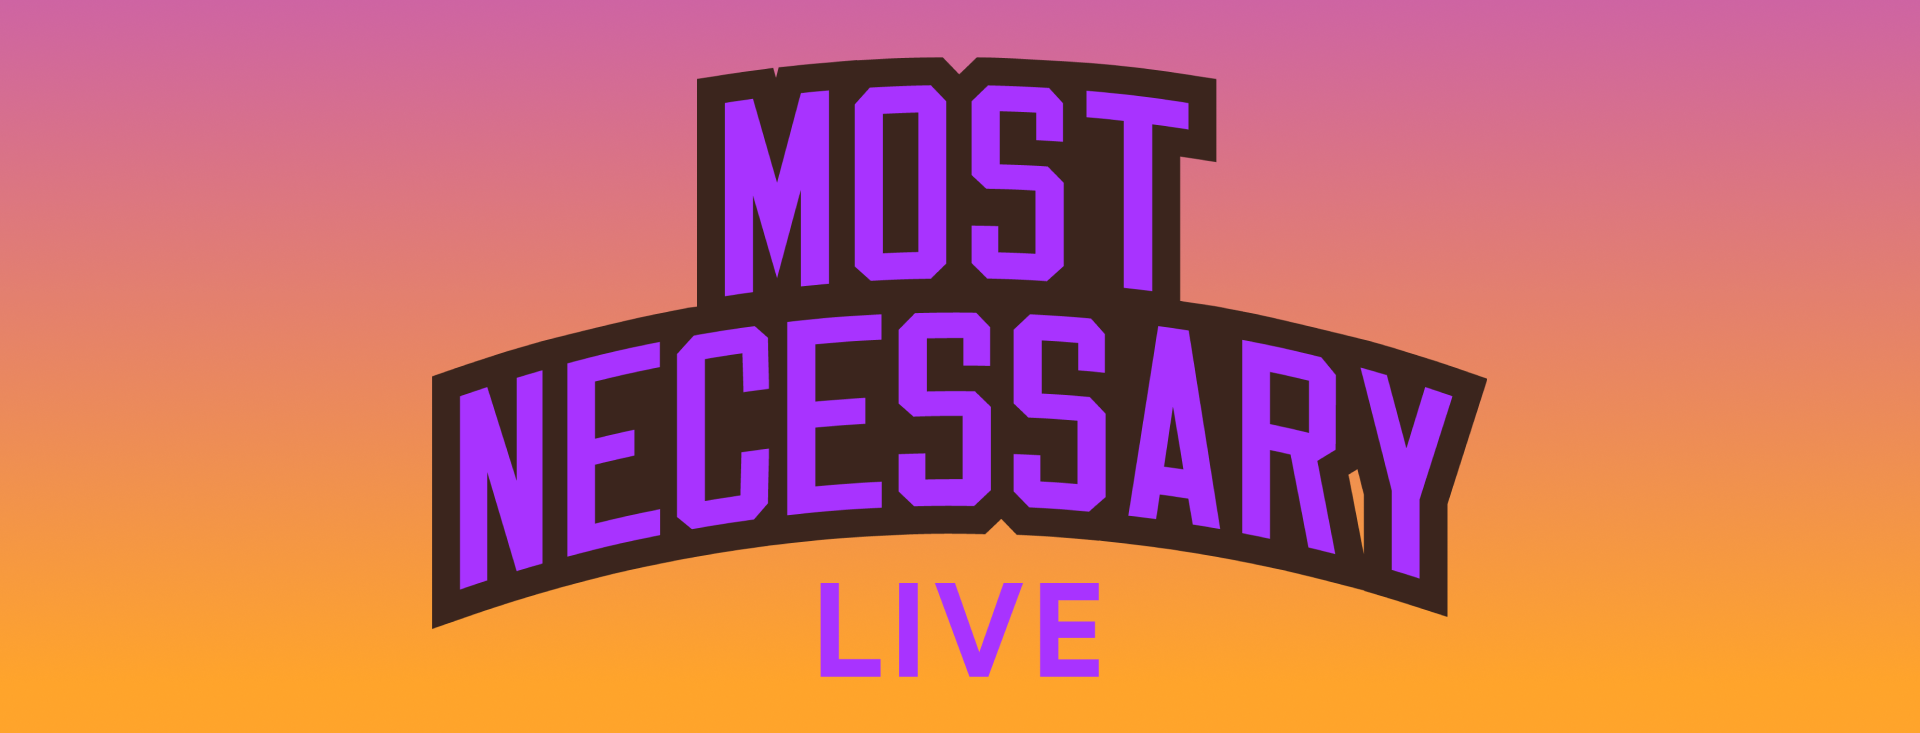 Spotify Launches Most Necessary Live, a Concert Series to Showcase Hip-Hops Rising Stars — Spotify image